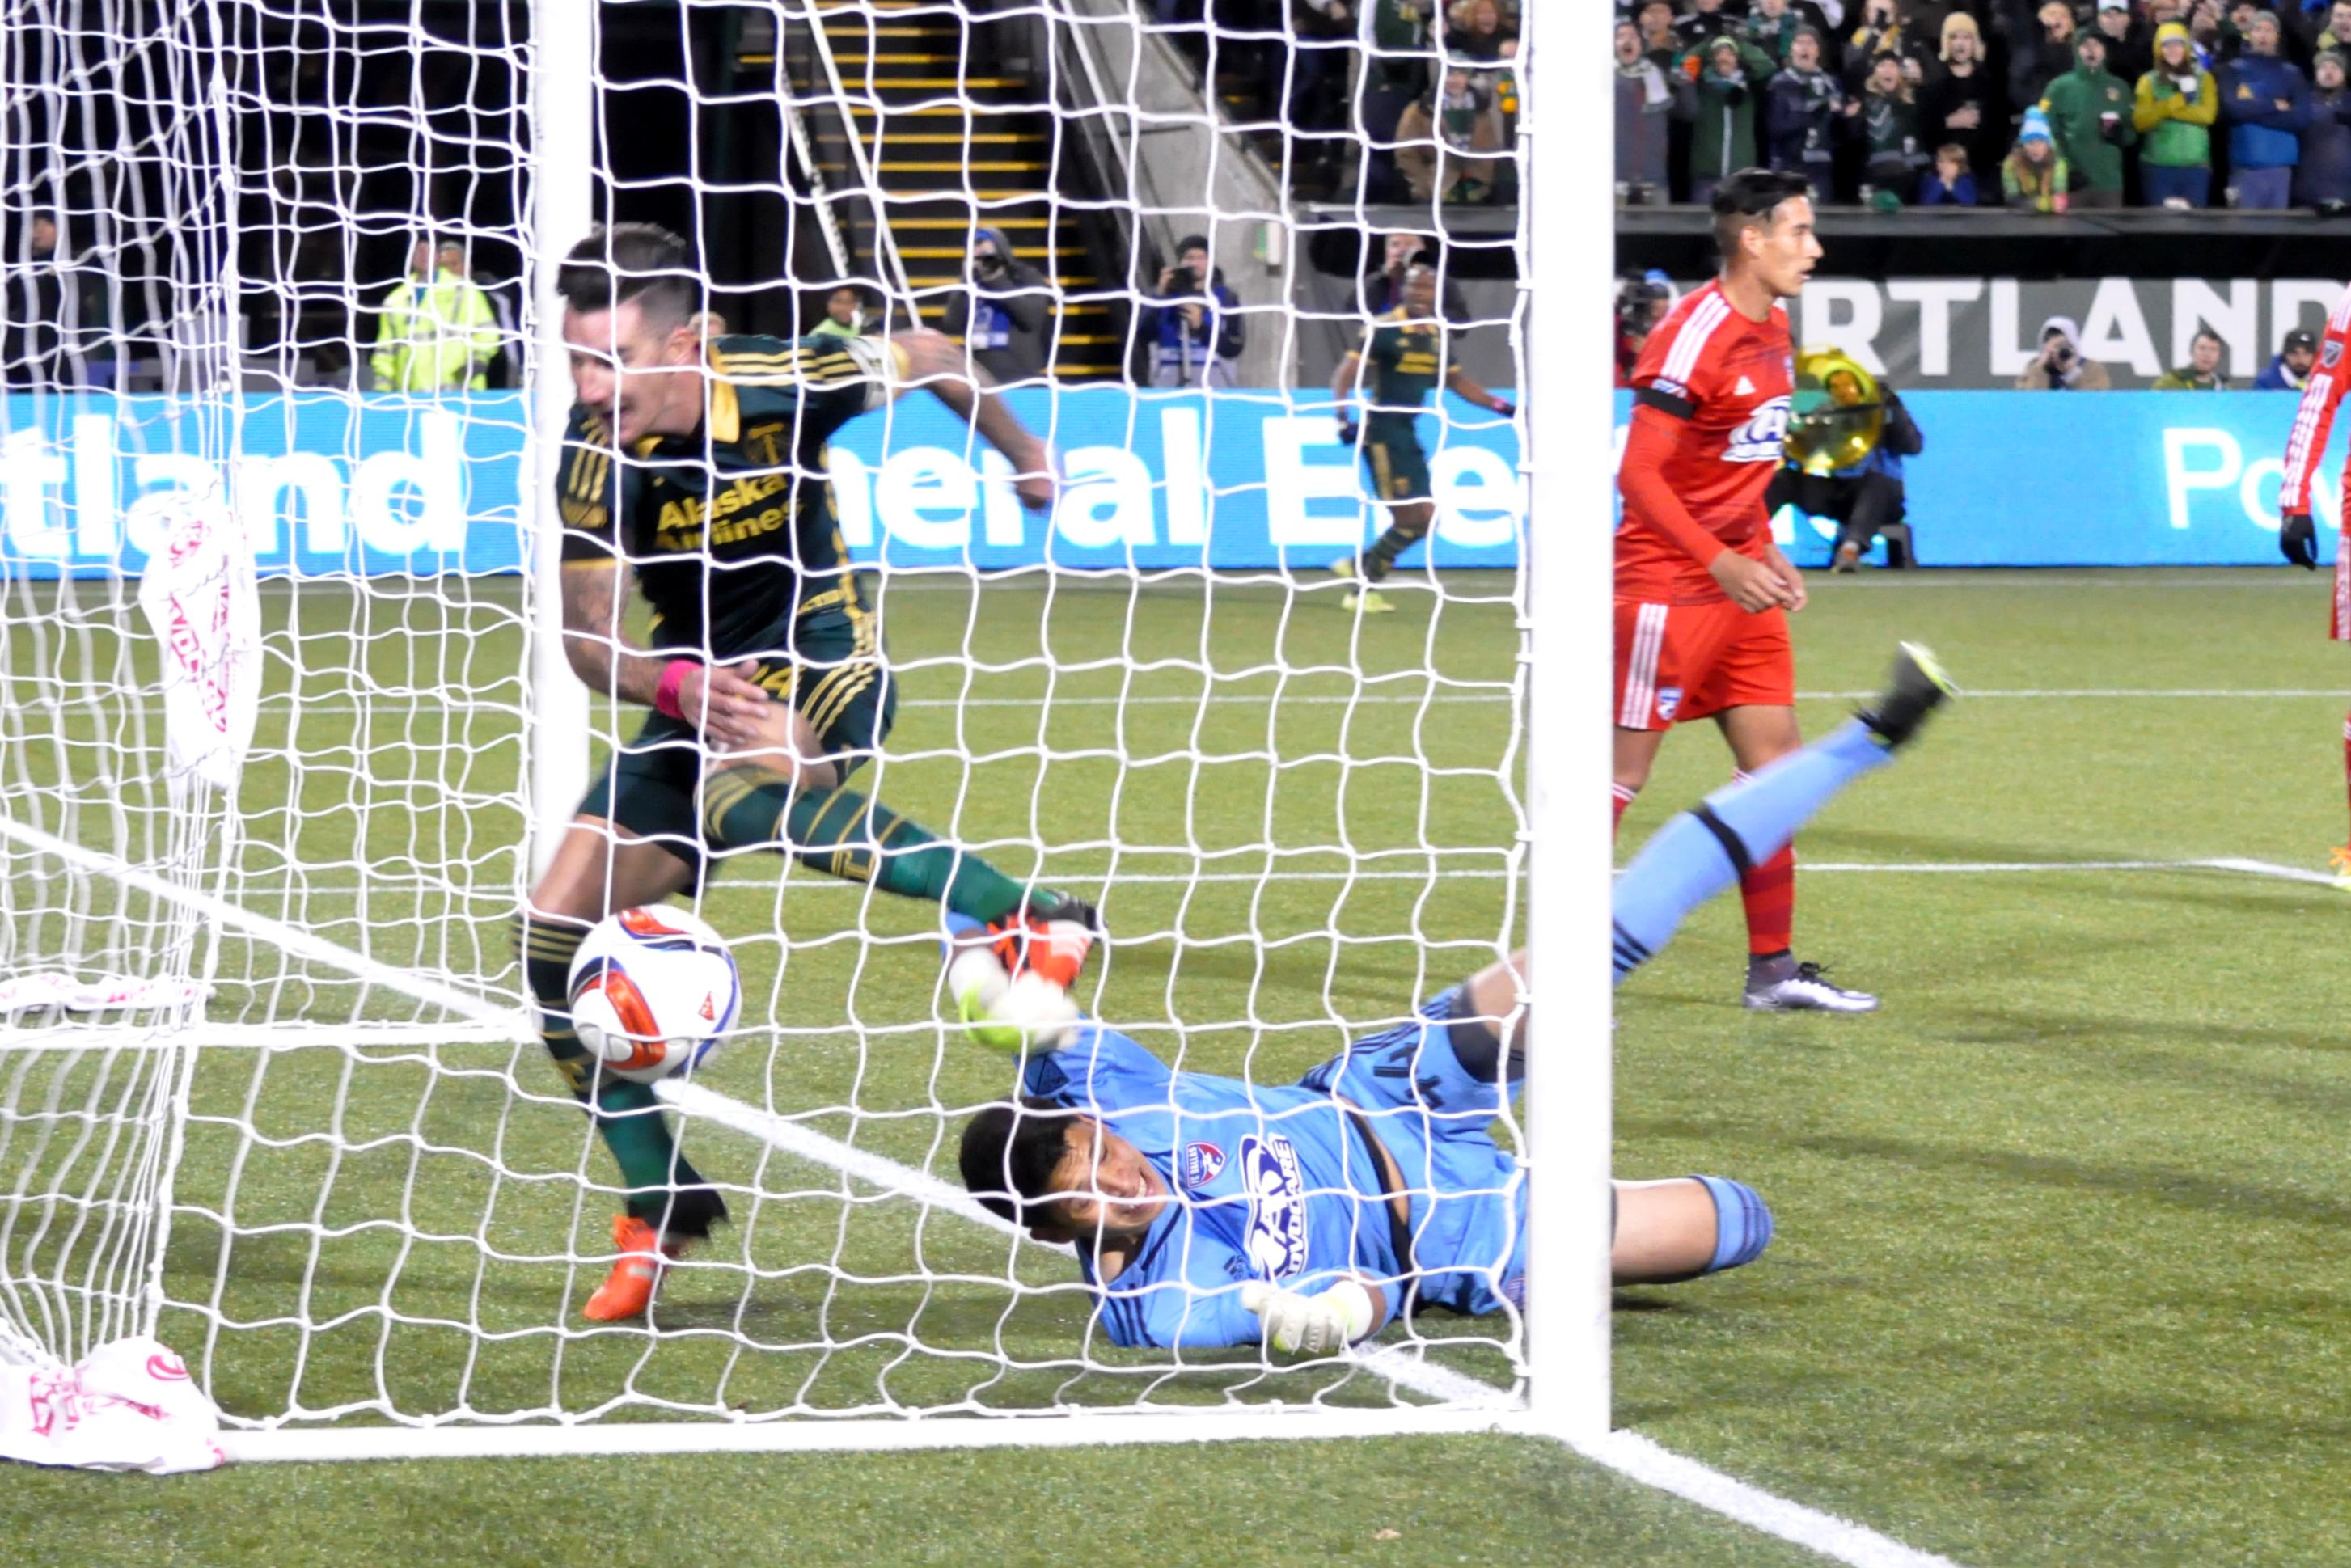 Timbers down FC Dallas 3-1 in first leg of Western Conference Final